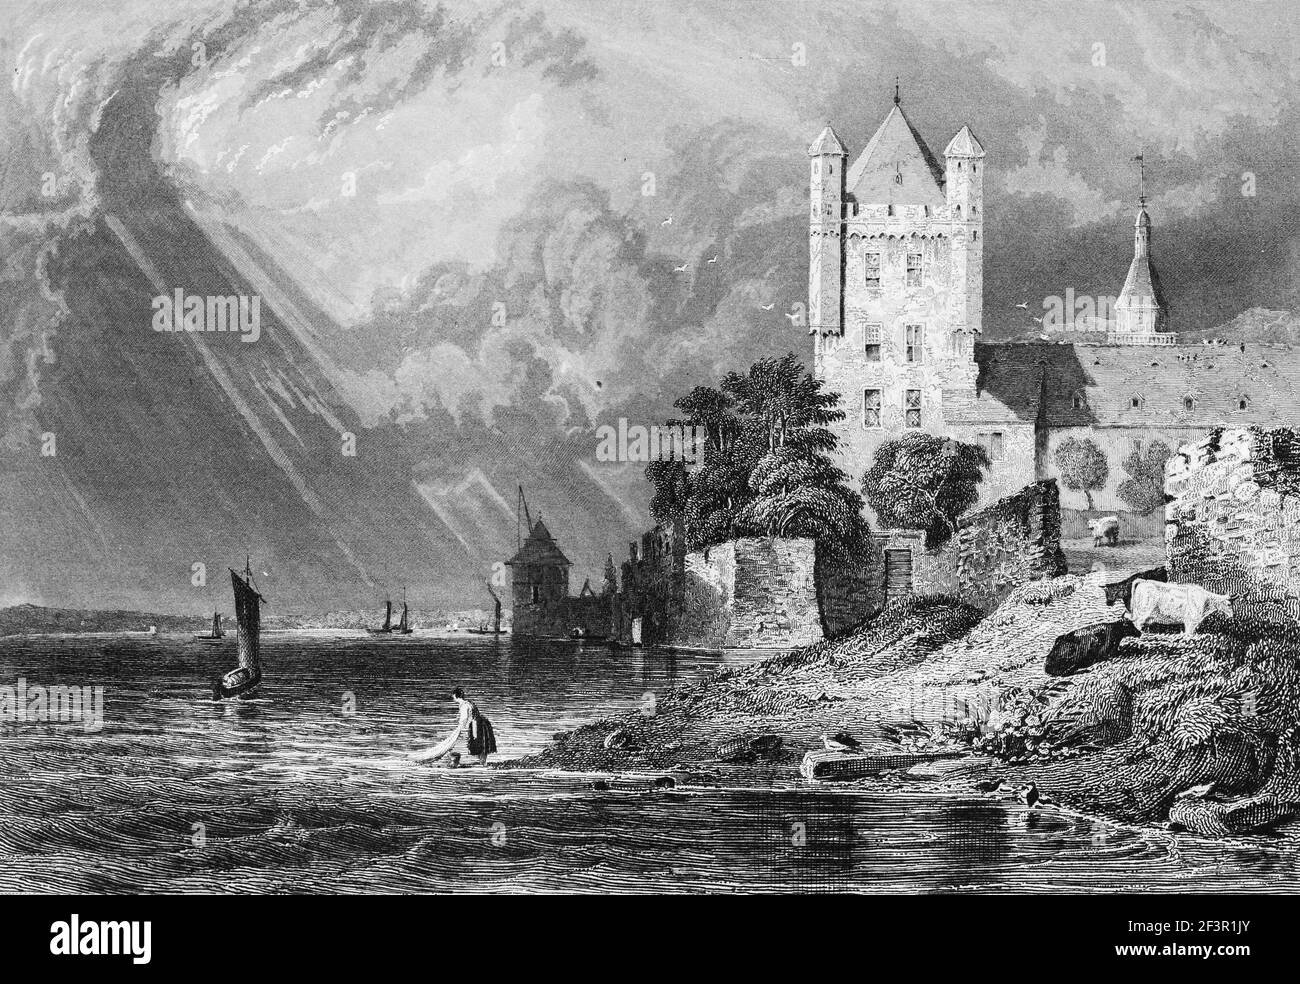 The Elector´s castle in Eltville on the Rhine River, woman doing the washing in the river,  Hesse, Germany, Steel engraving of 1832 Stock Photo